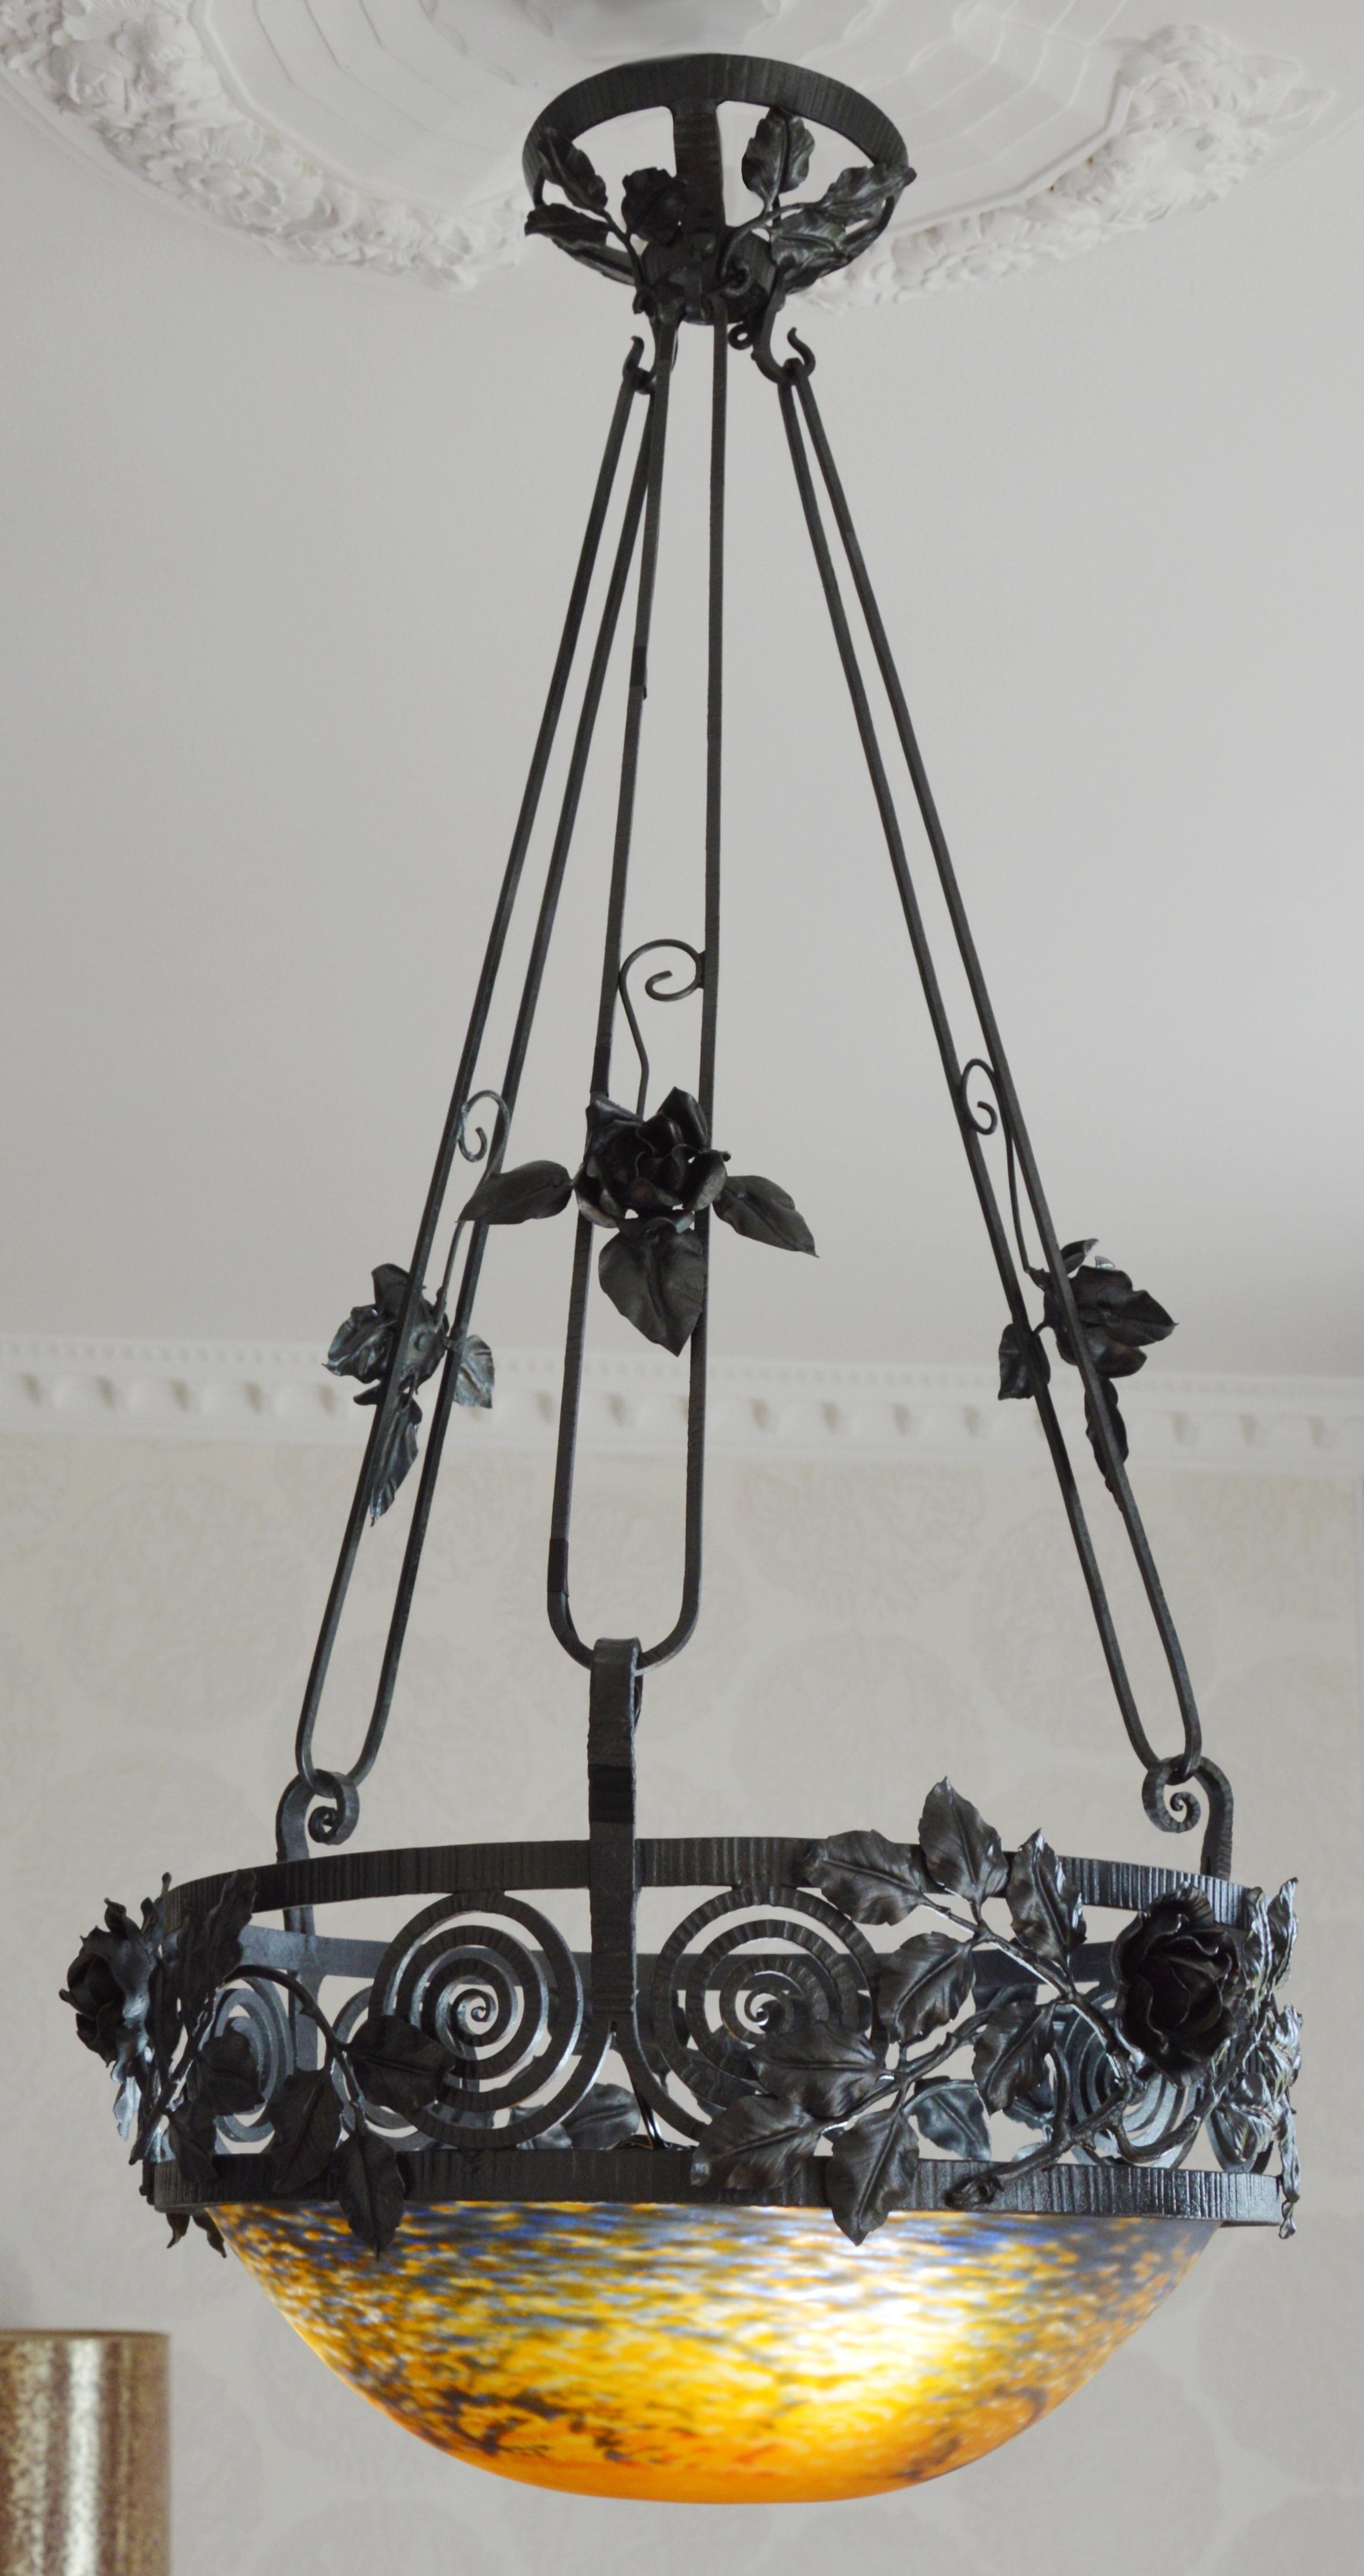 Jean Noverdy French Art Deco Wrought-Iron Pendant Chandelier, Late 1920s For Sale 9